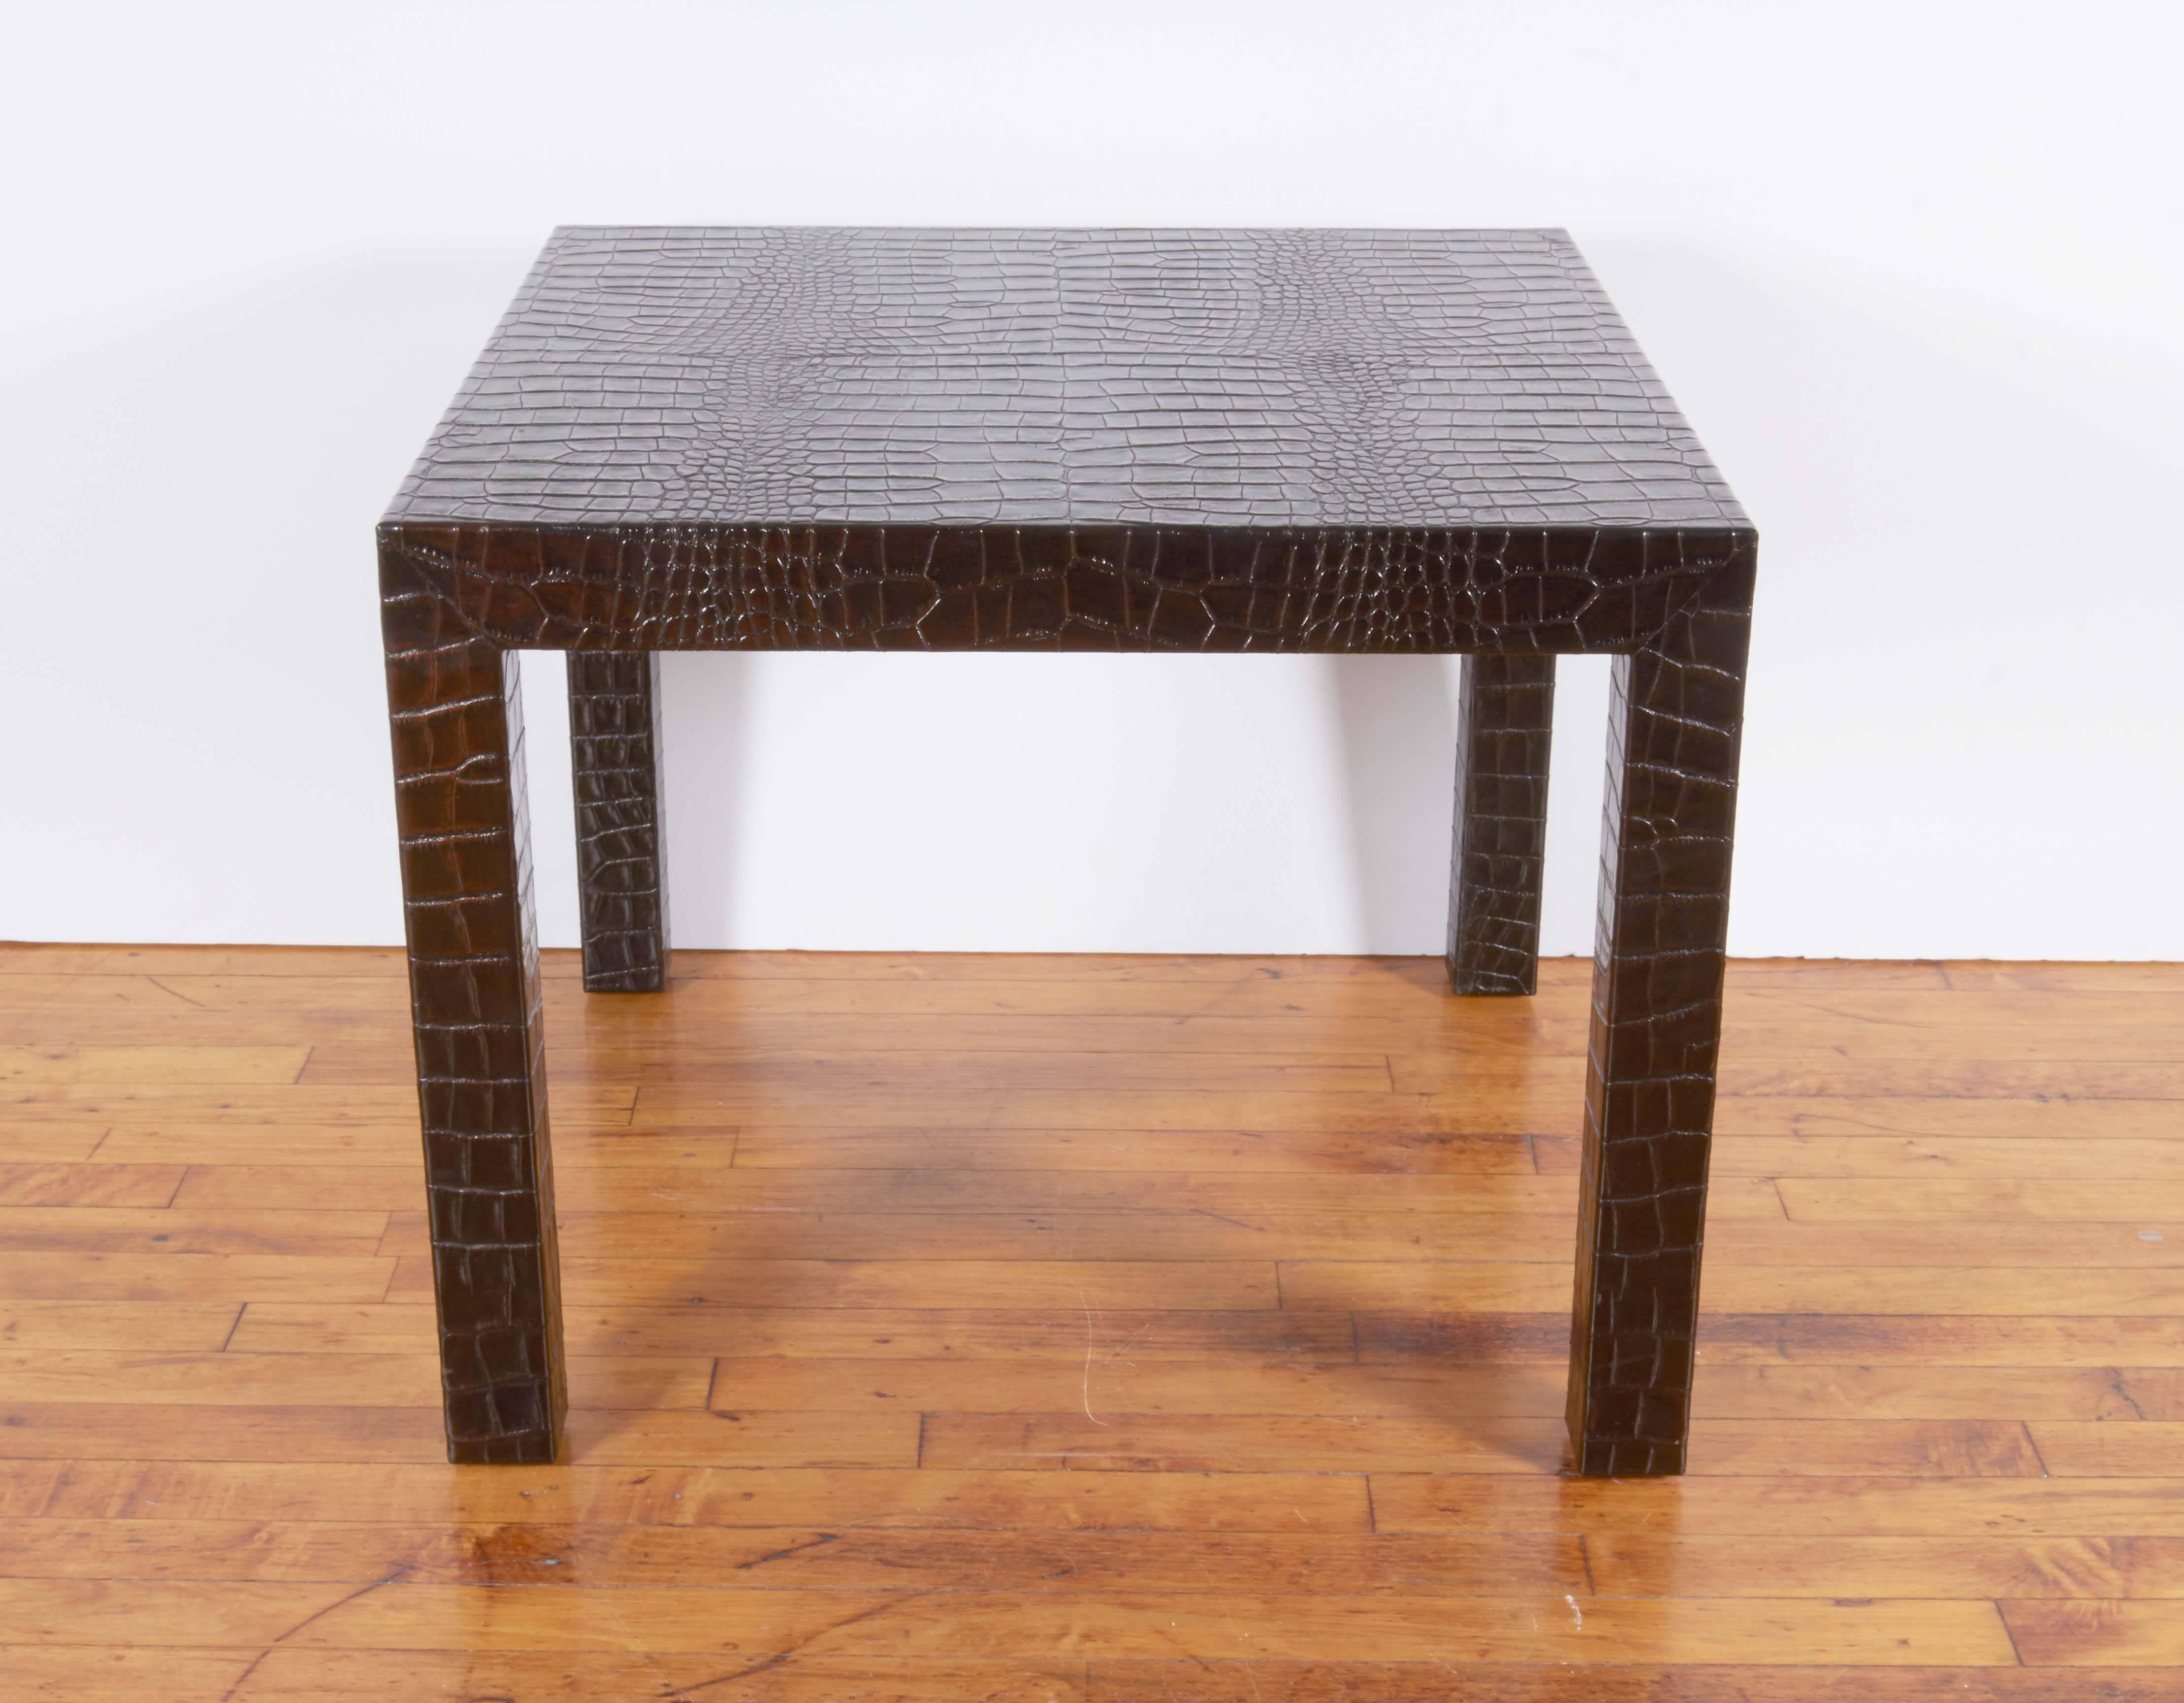 A pair of side and end Parsons tables, inspired by designer Karl Springer, covered in dark brown leather, embossed with alligator skin pattern, against wood bases. The tables remain in very good overall condition, with minor presence of wear and